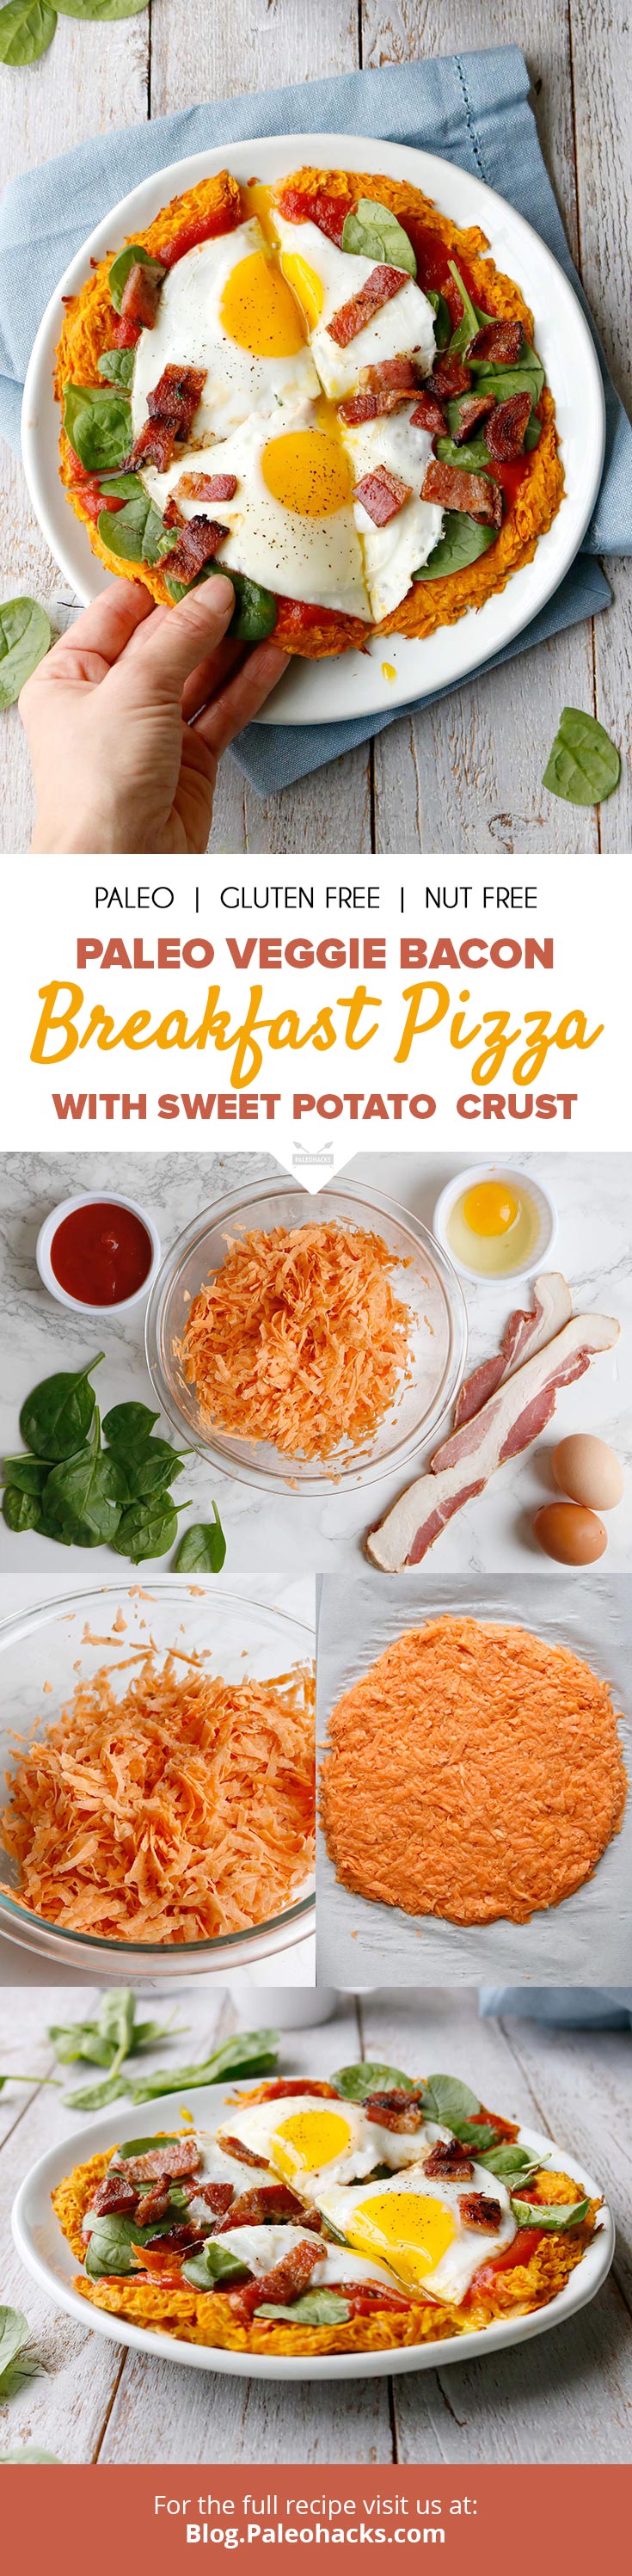 Enjoy pizza for breakfast with this egg, spinach and bacon pie served on a sweet potato crust.